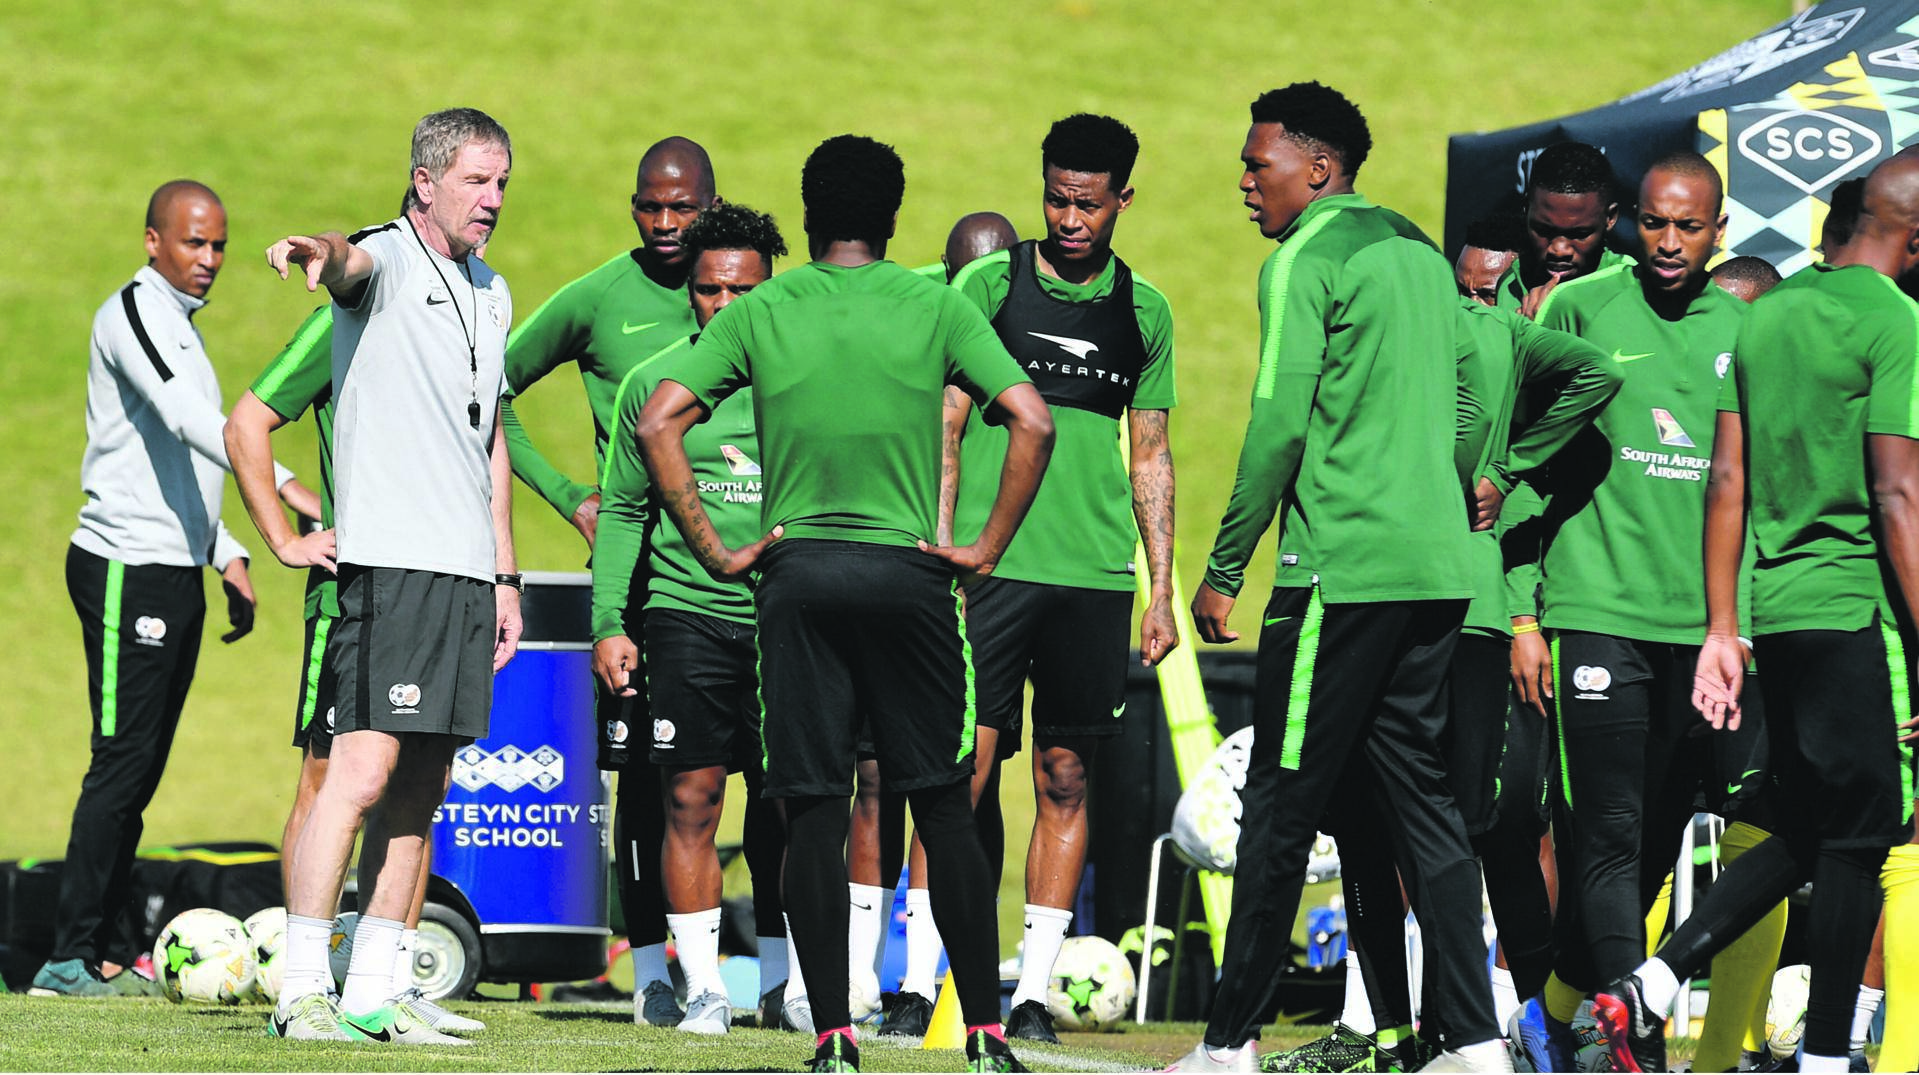  Bafana coach Stuart Baxter and the players during team training at Steyn City School in Fourways, Johannesburg, this week. Picture: Lefty Shivambu / Gallo Images